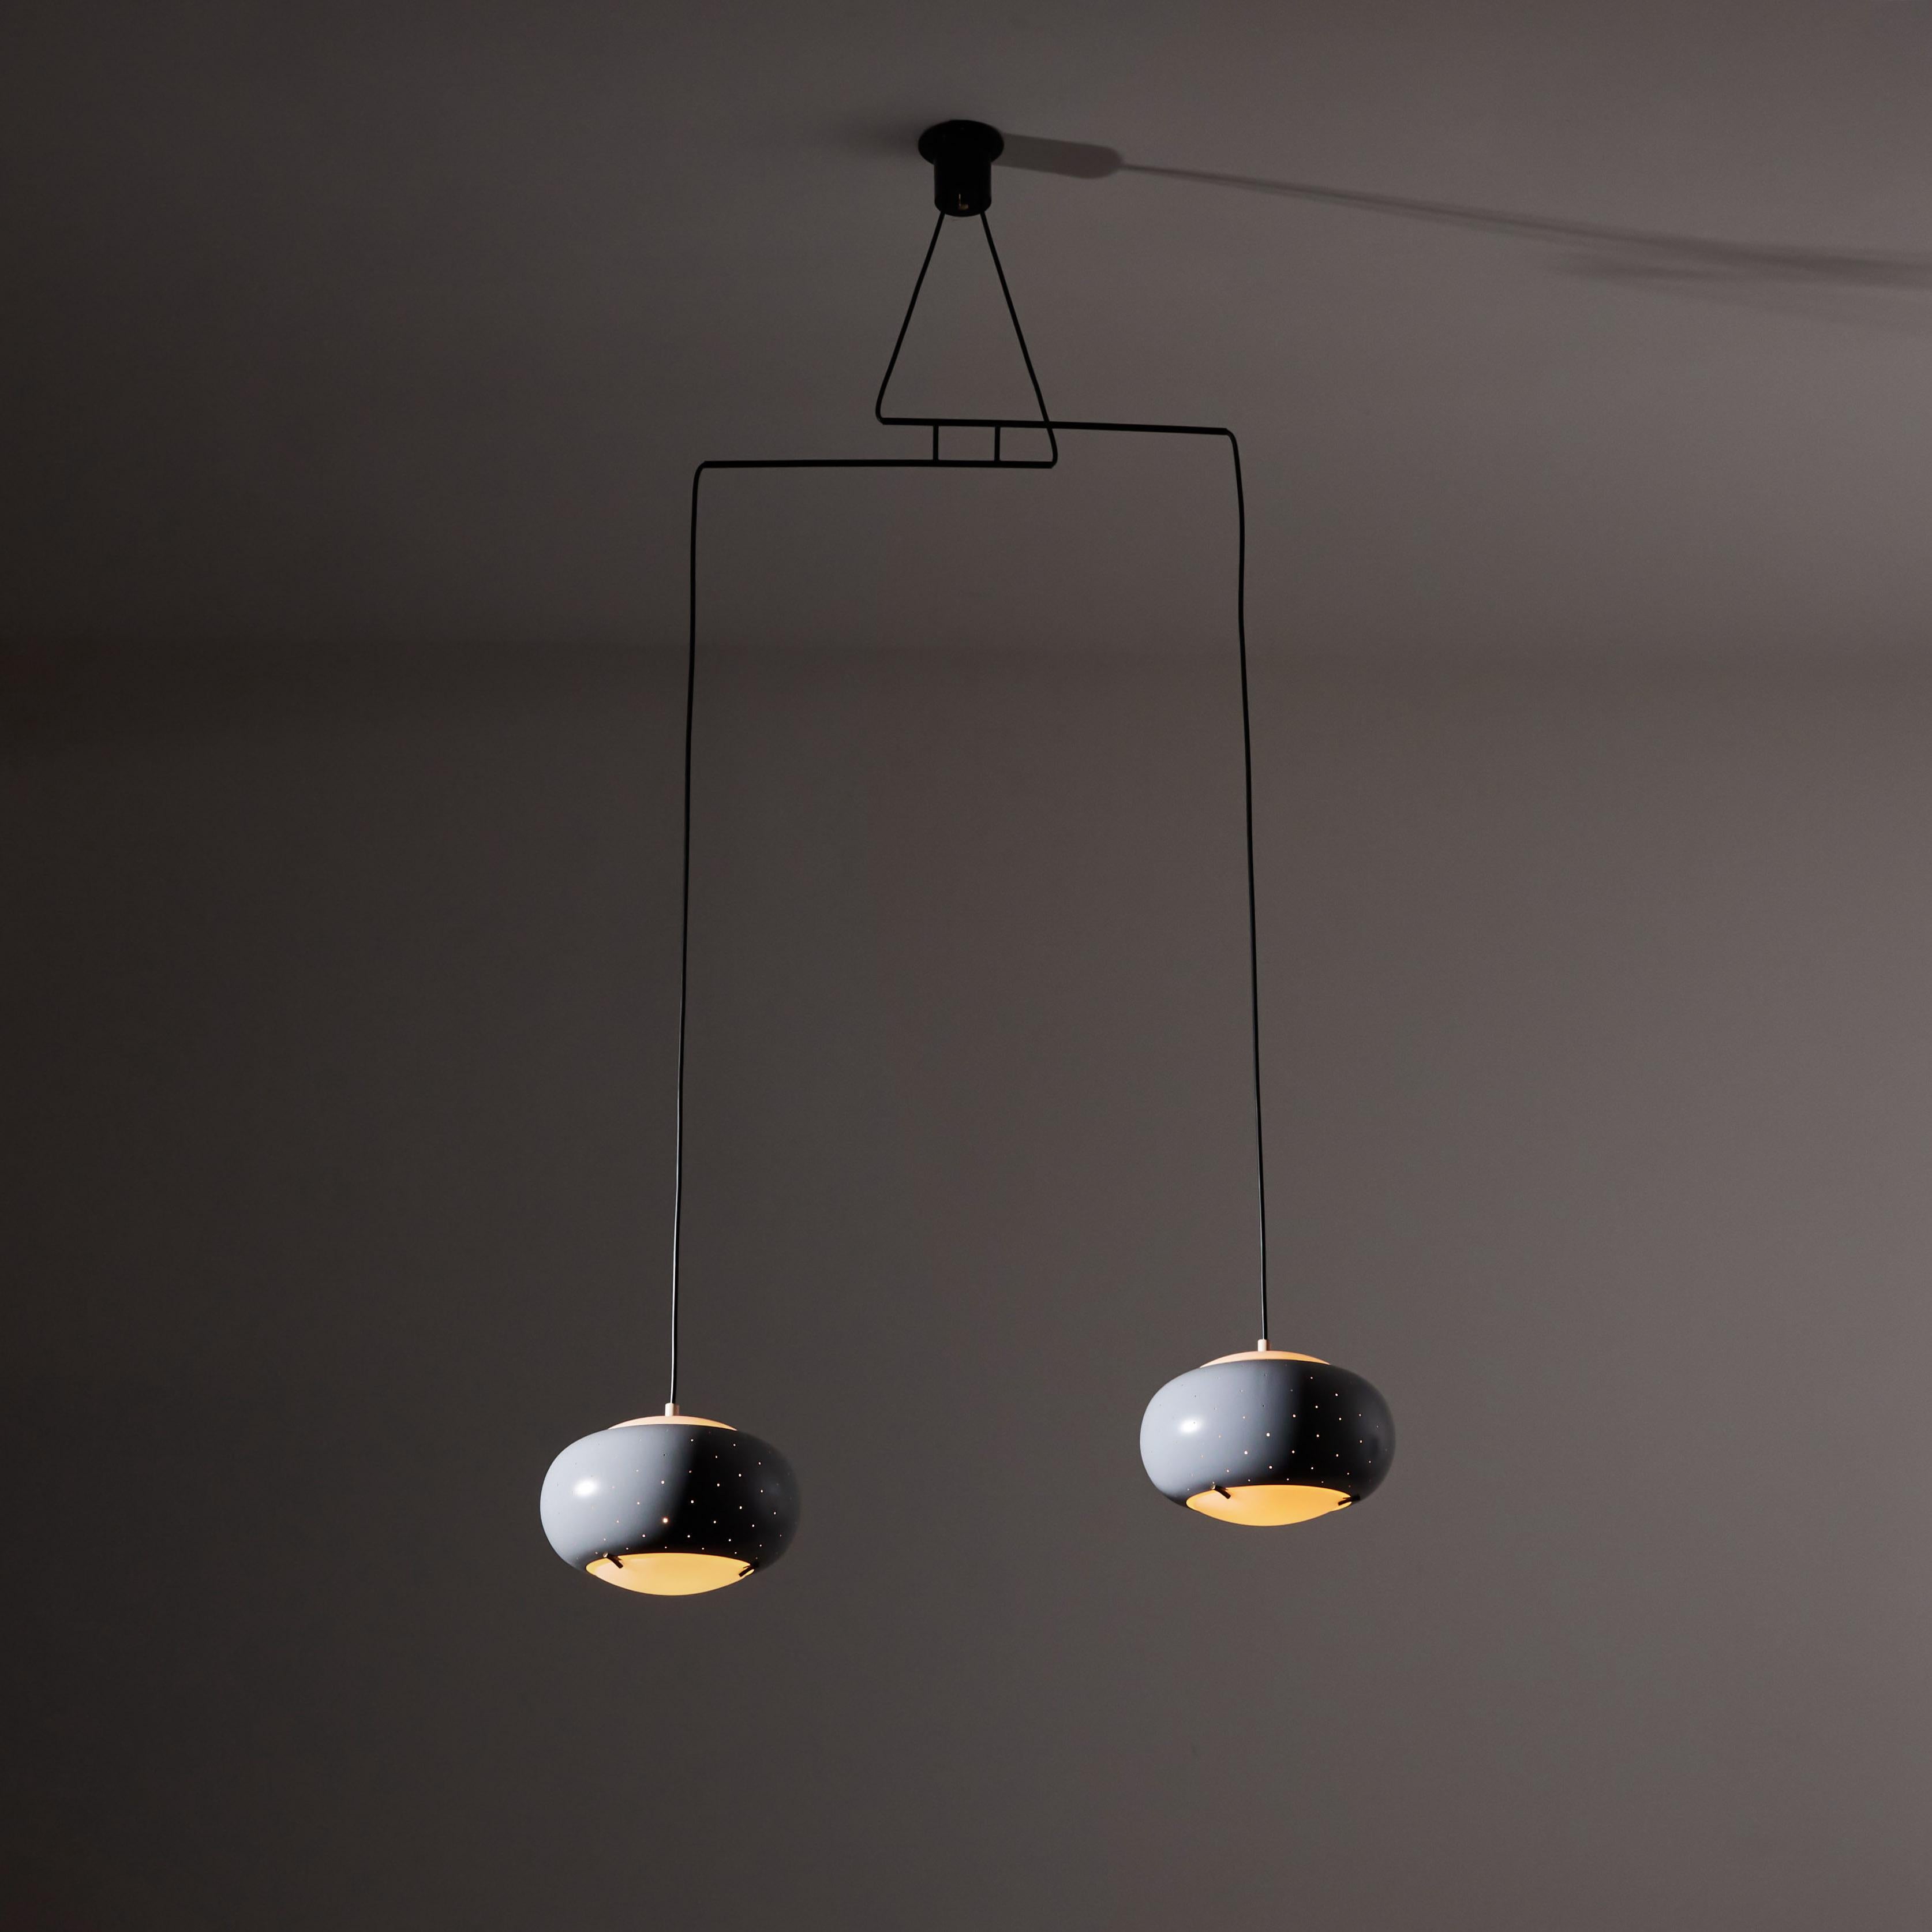 Suspension light by Stilux. Manufactured in Italy, circa 1950's. Enameled metal, glass brass, custom brass backplates. Rewired for U.S. standards. We recommend two E27 100w maximum bulbs. Bulbs provided as a one time courtesy.